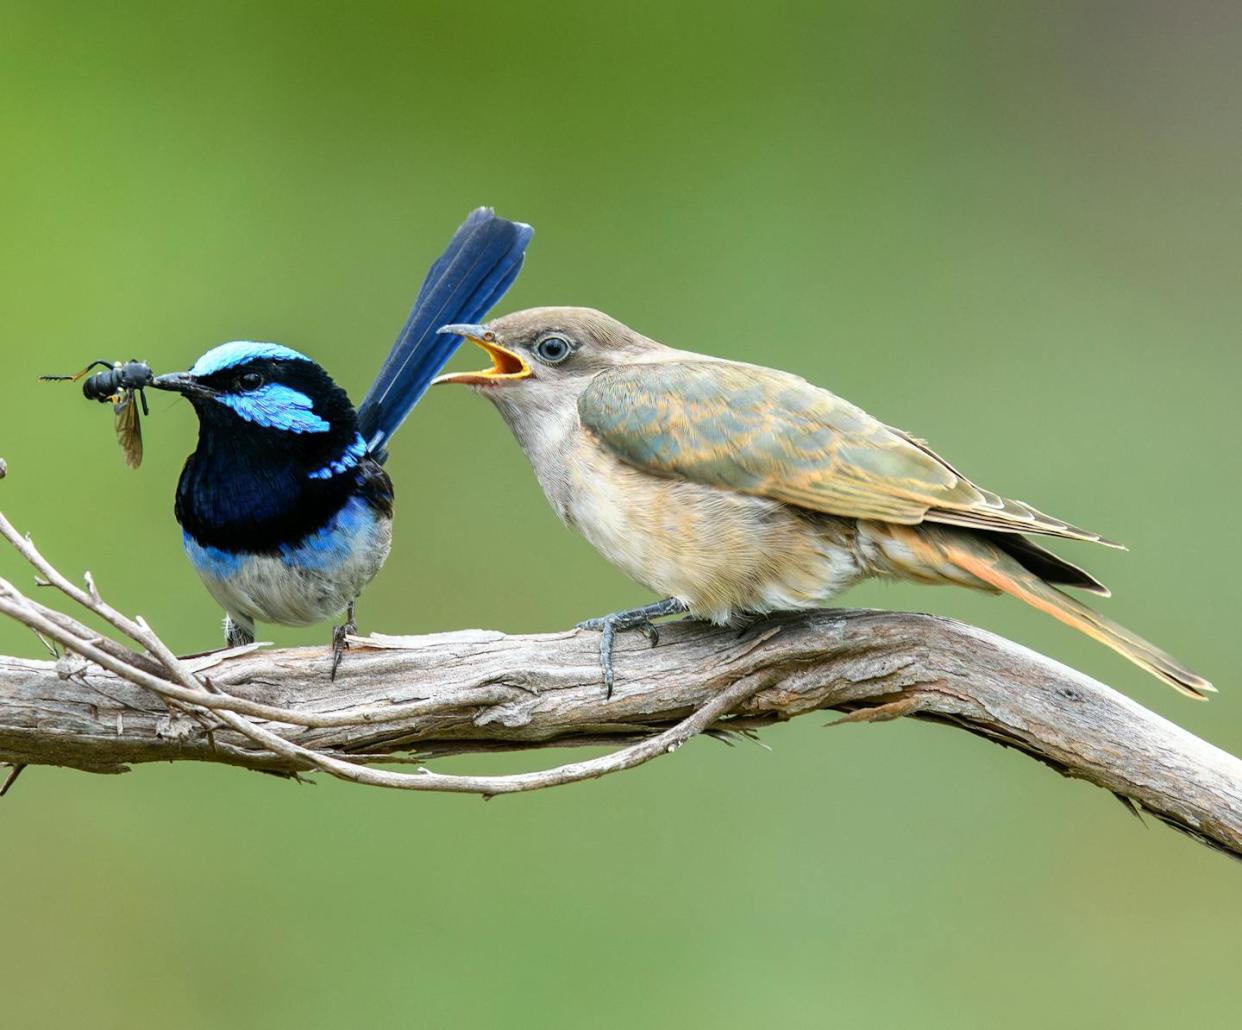 A superb fairy wren foster parent about to feed a Horsfield's bronze cuckoo chick. Mark Lethlean